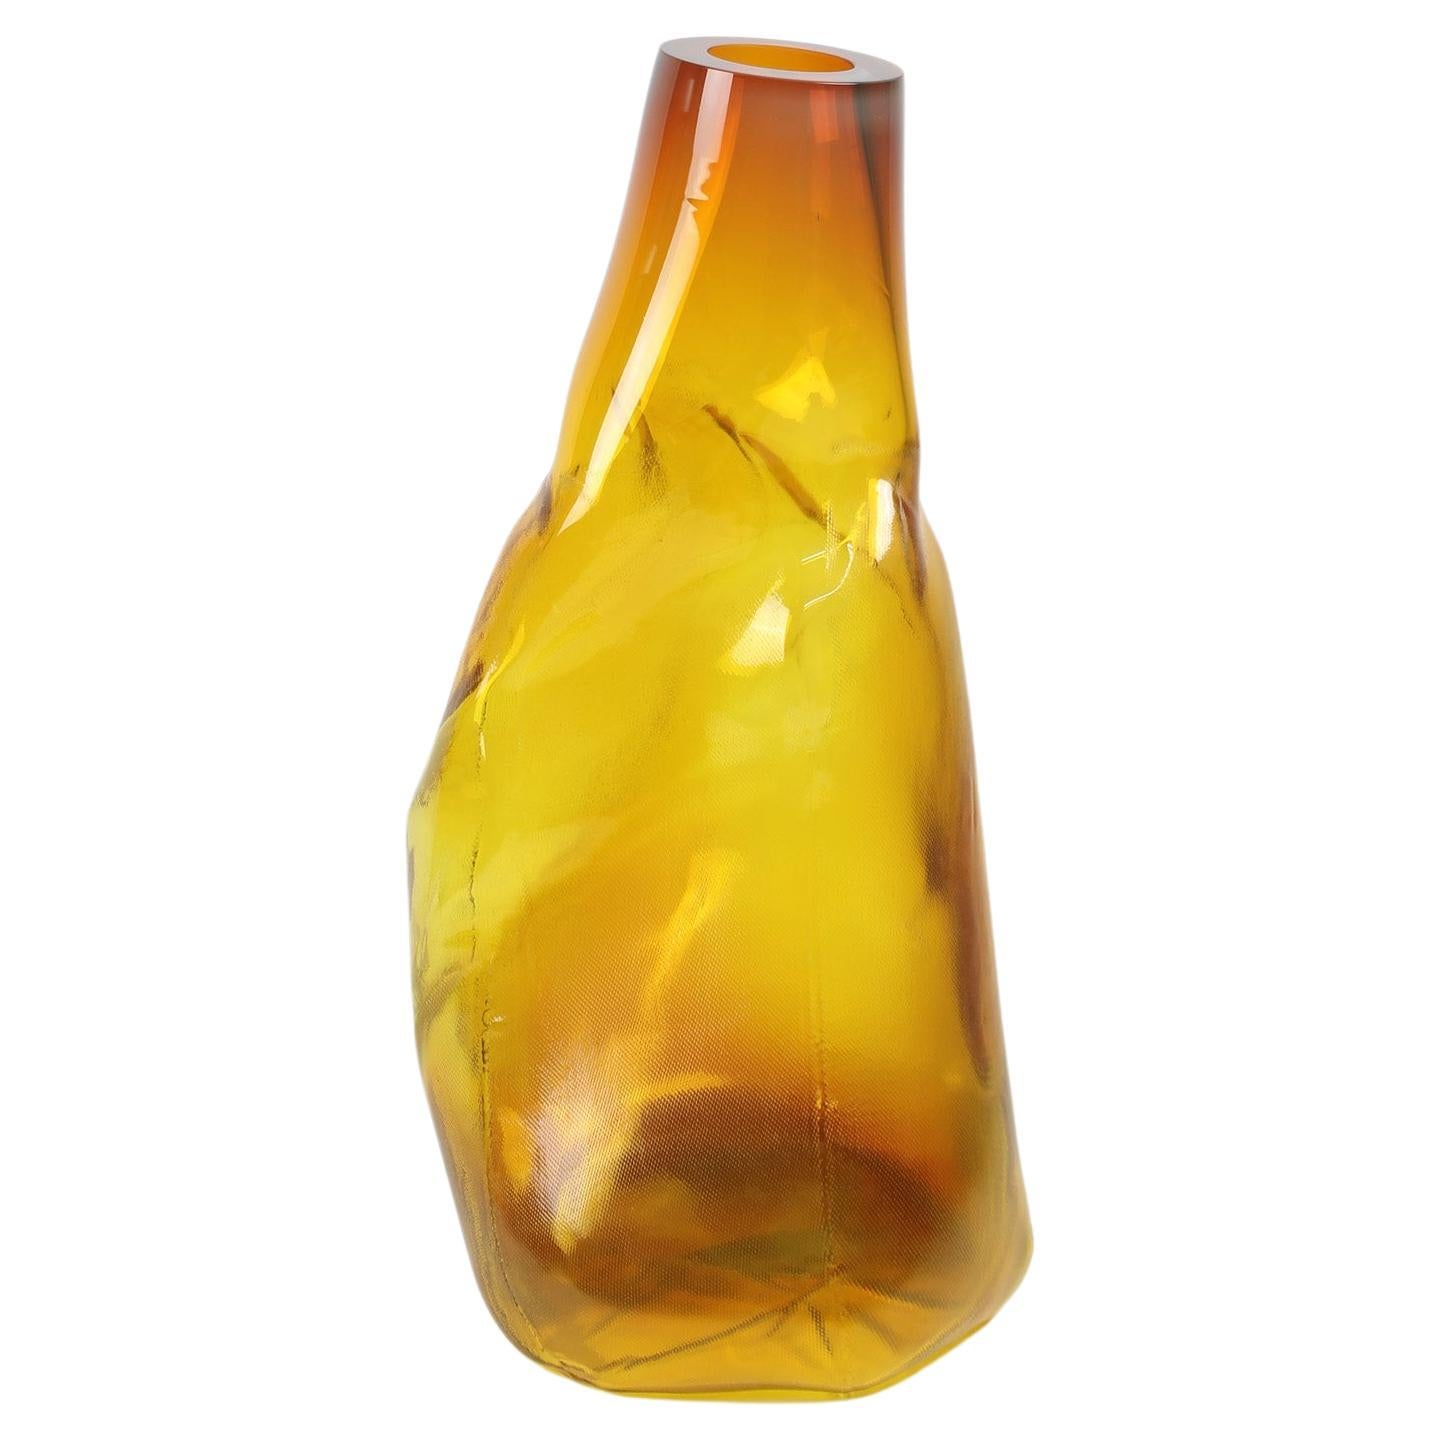 105 Ltr Forms, Brilliant Gold, Handmade Glass Object by Vogel Studio